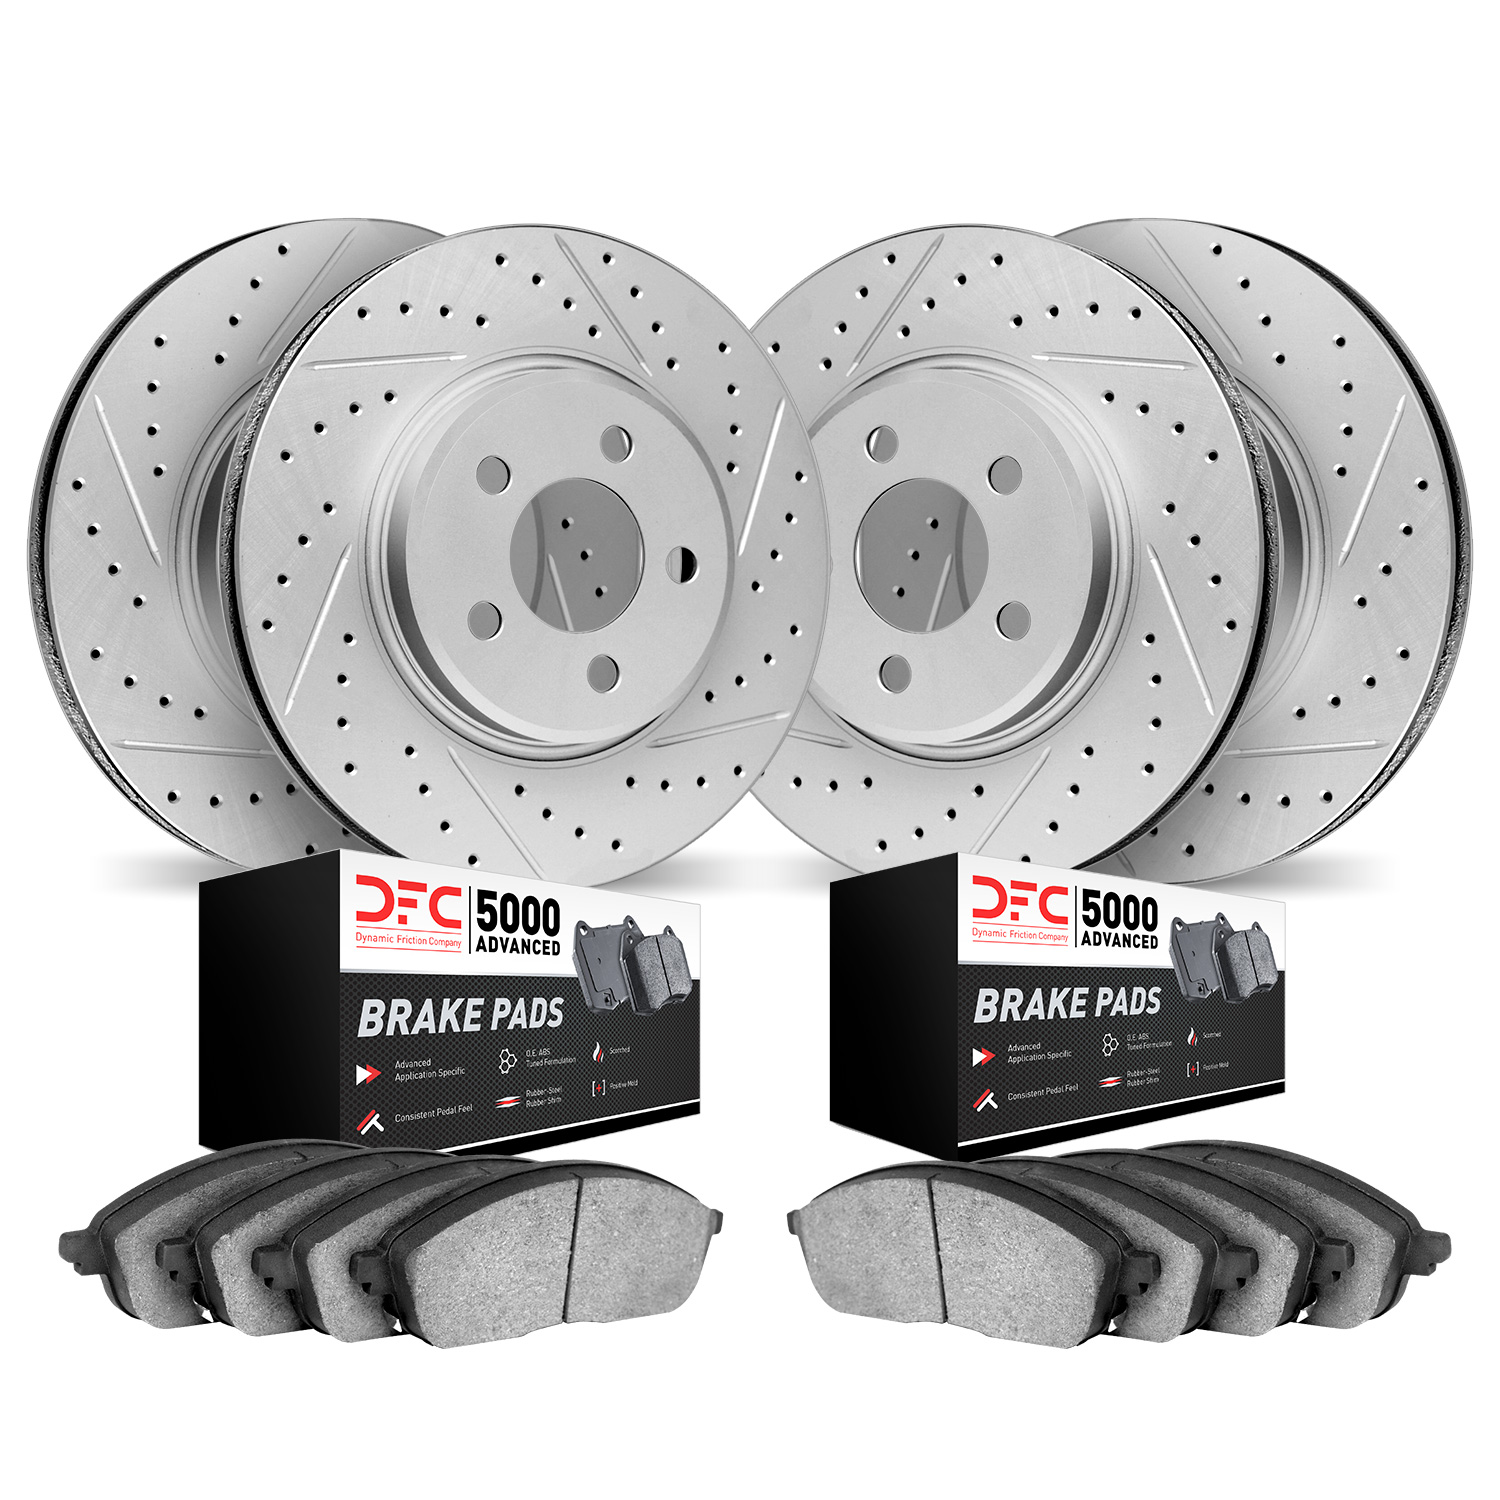 2504-54313 Geoperformance Drilled/Slotted Rotors w/5000 Advanced Brake Pads Kit, 2013-2016 Ford/Lincoln/Mercury/Mazda, Position: